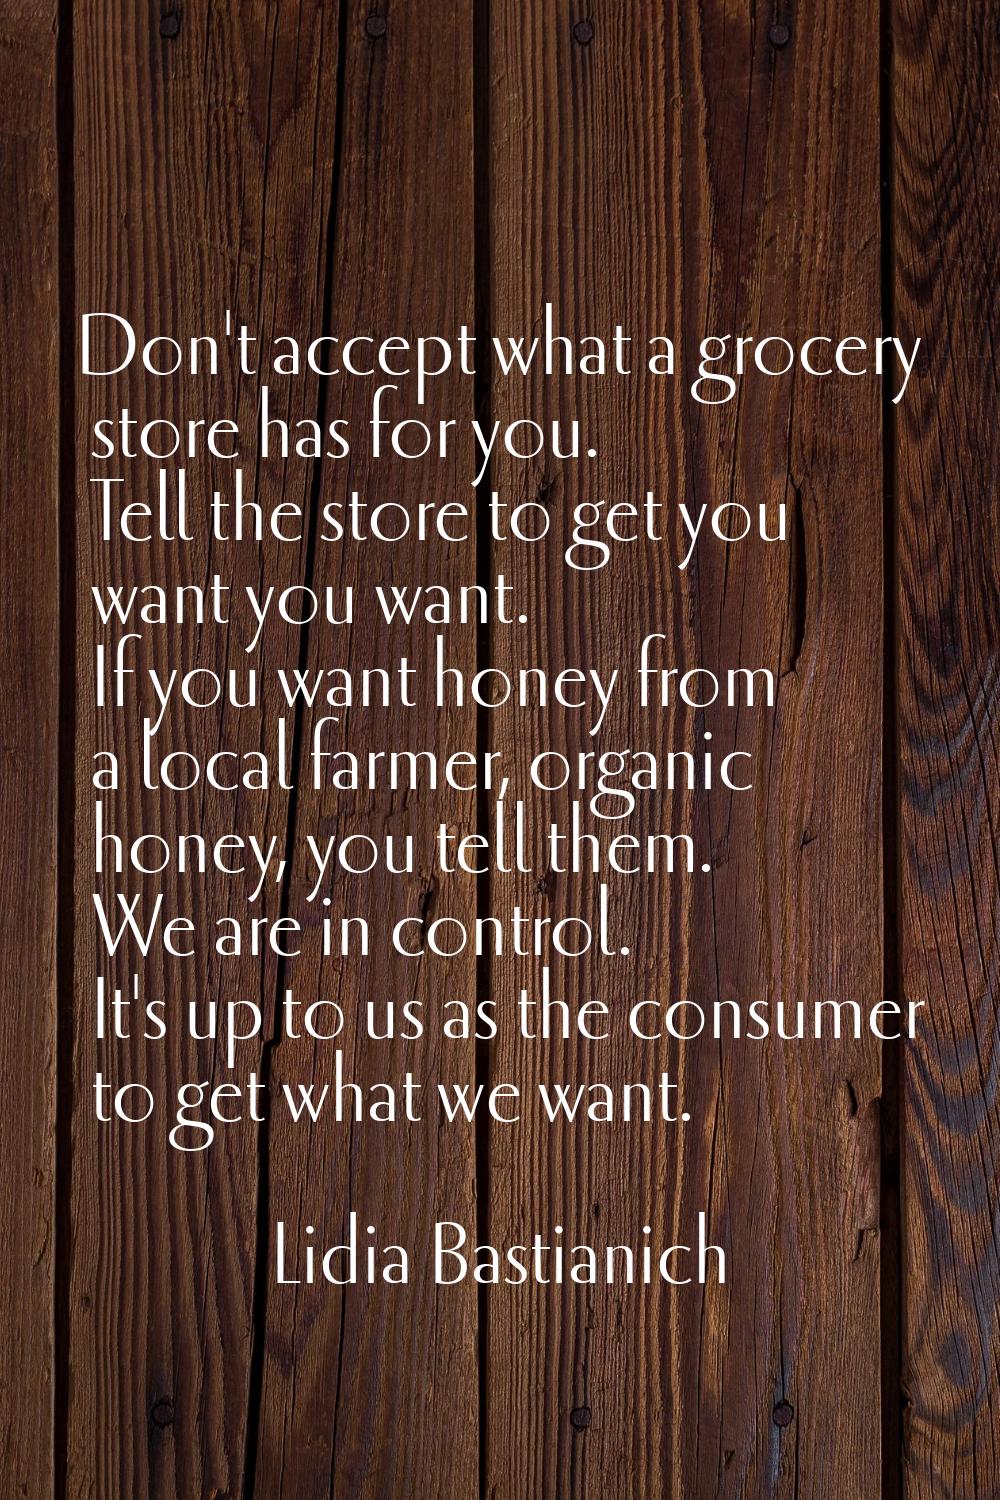 Don't accept what a grocery store has for you. Tell the store to get you want you want. If you want